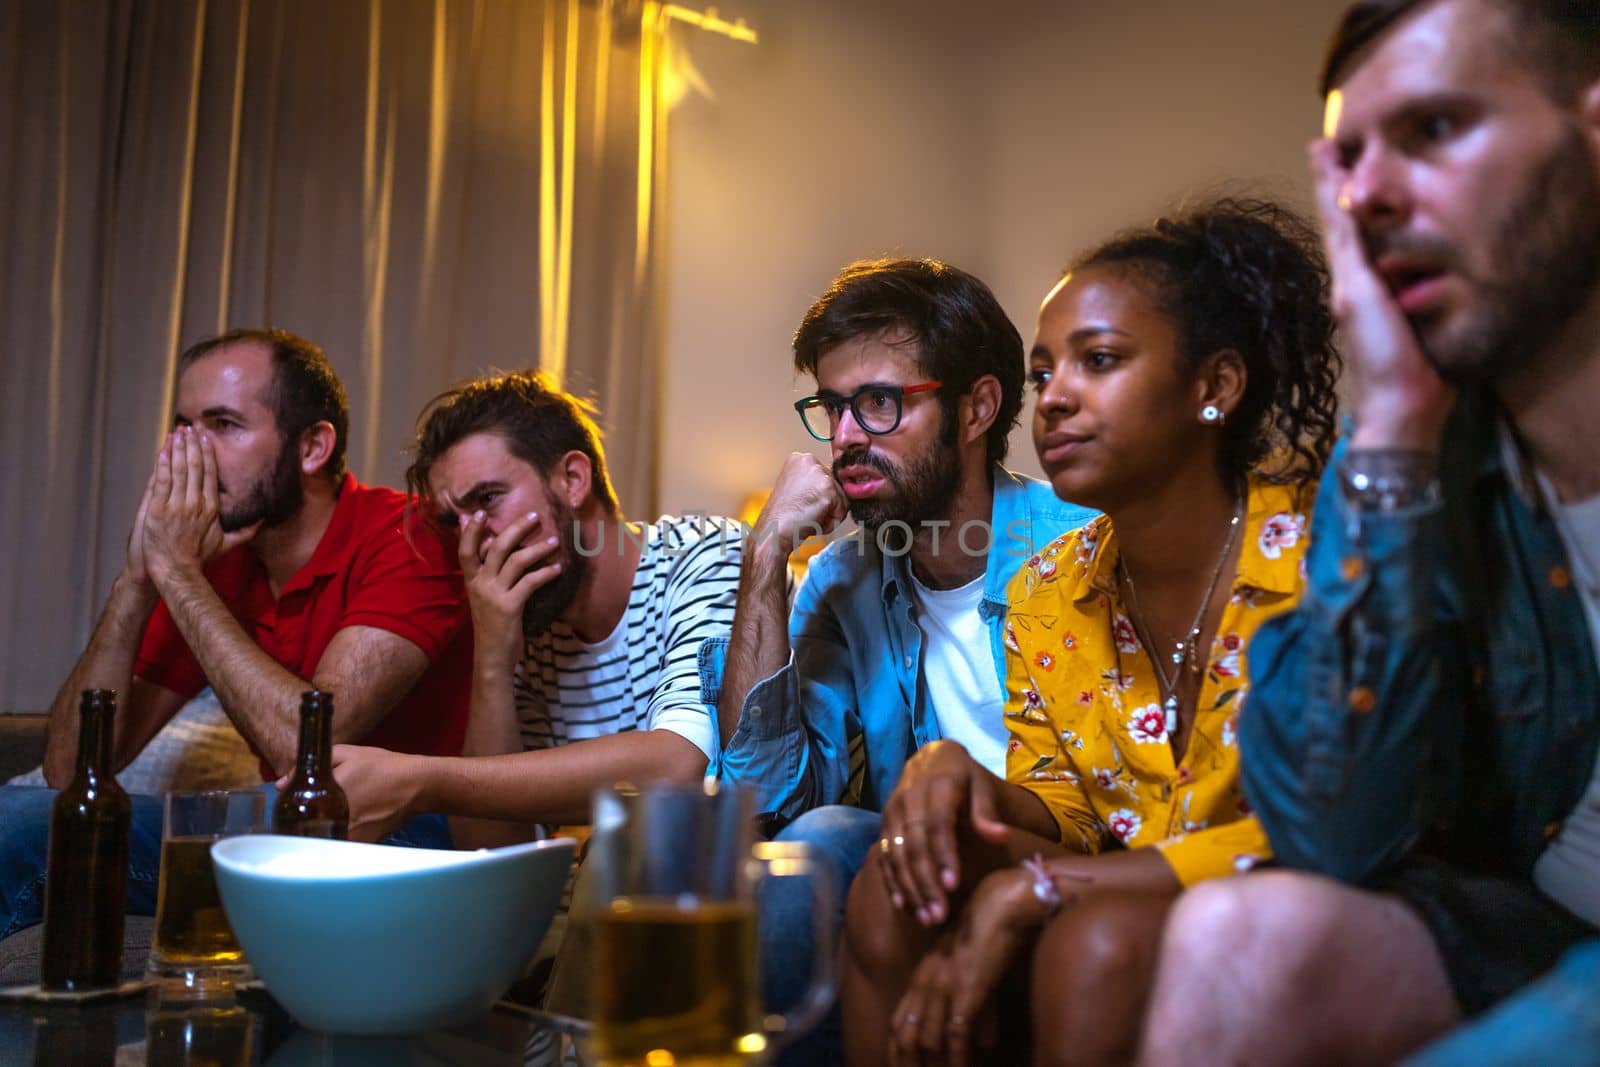 Group of friends watching football game on tv worried and sad because their team is losing. Soccer. Leisure activities concept.